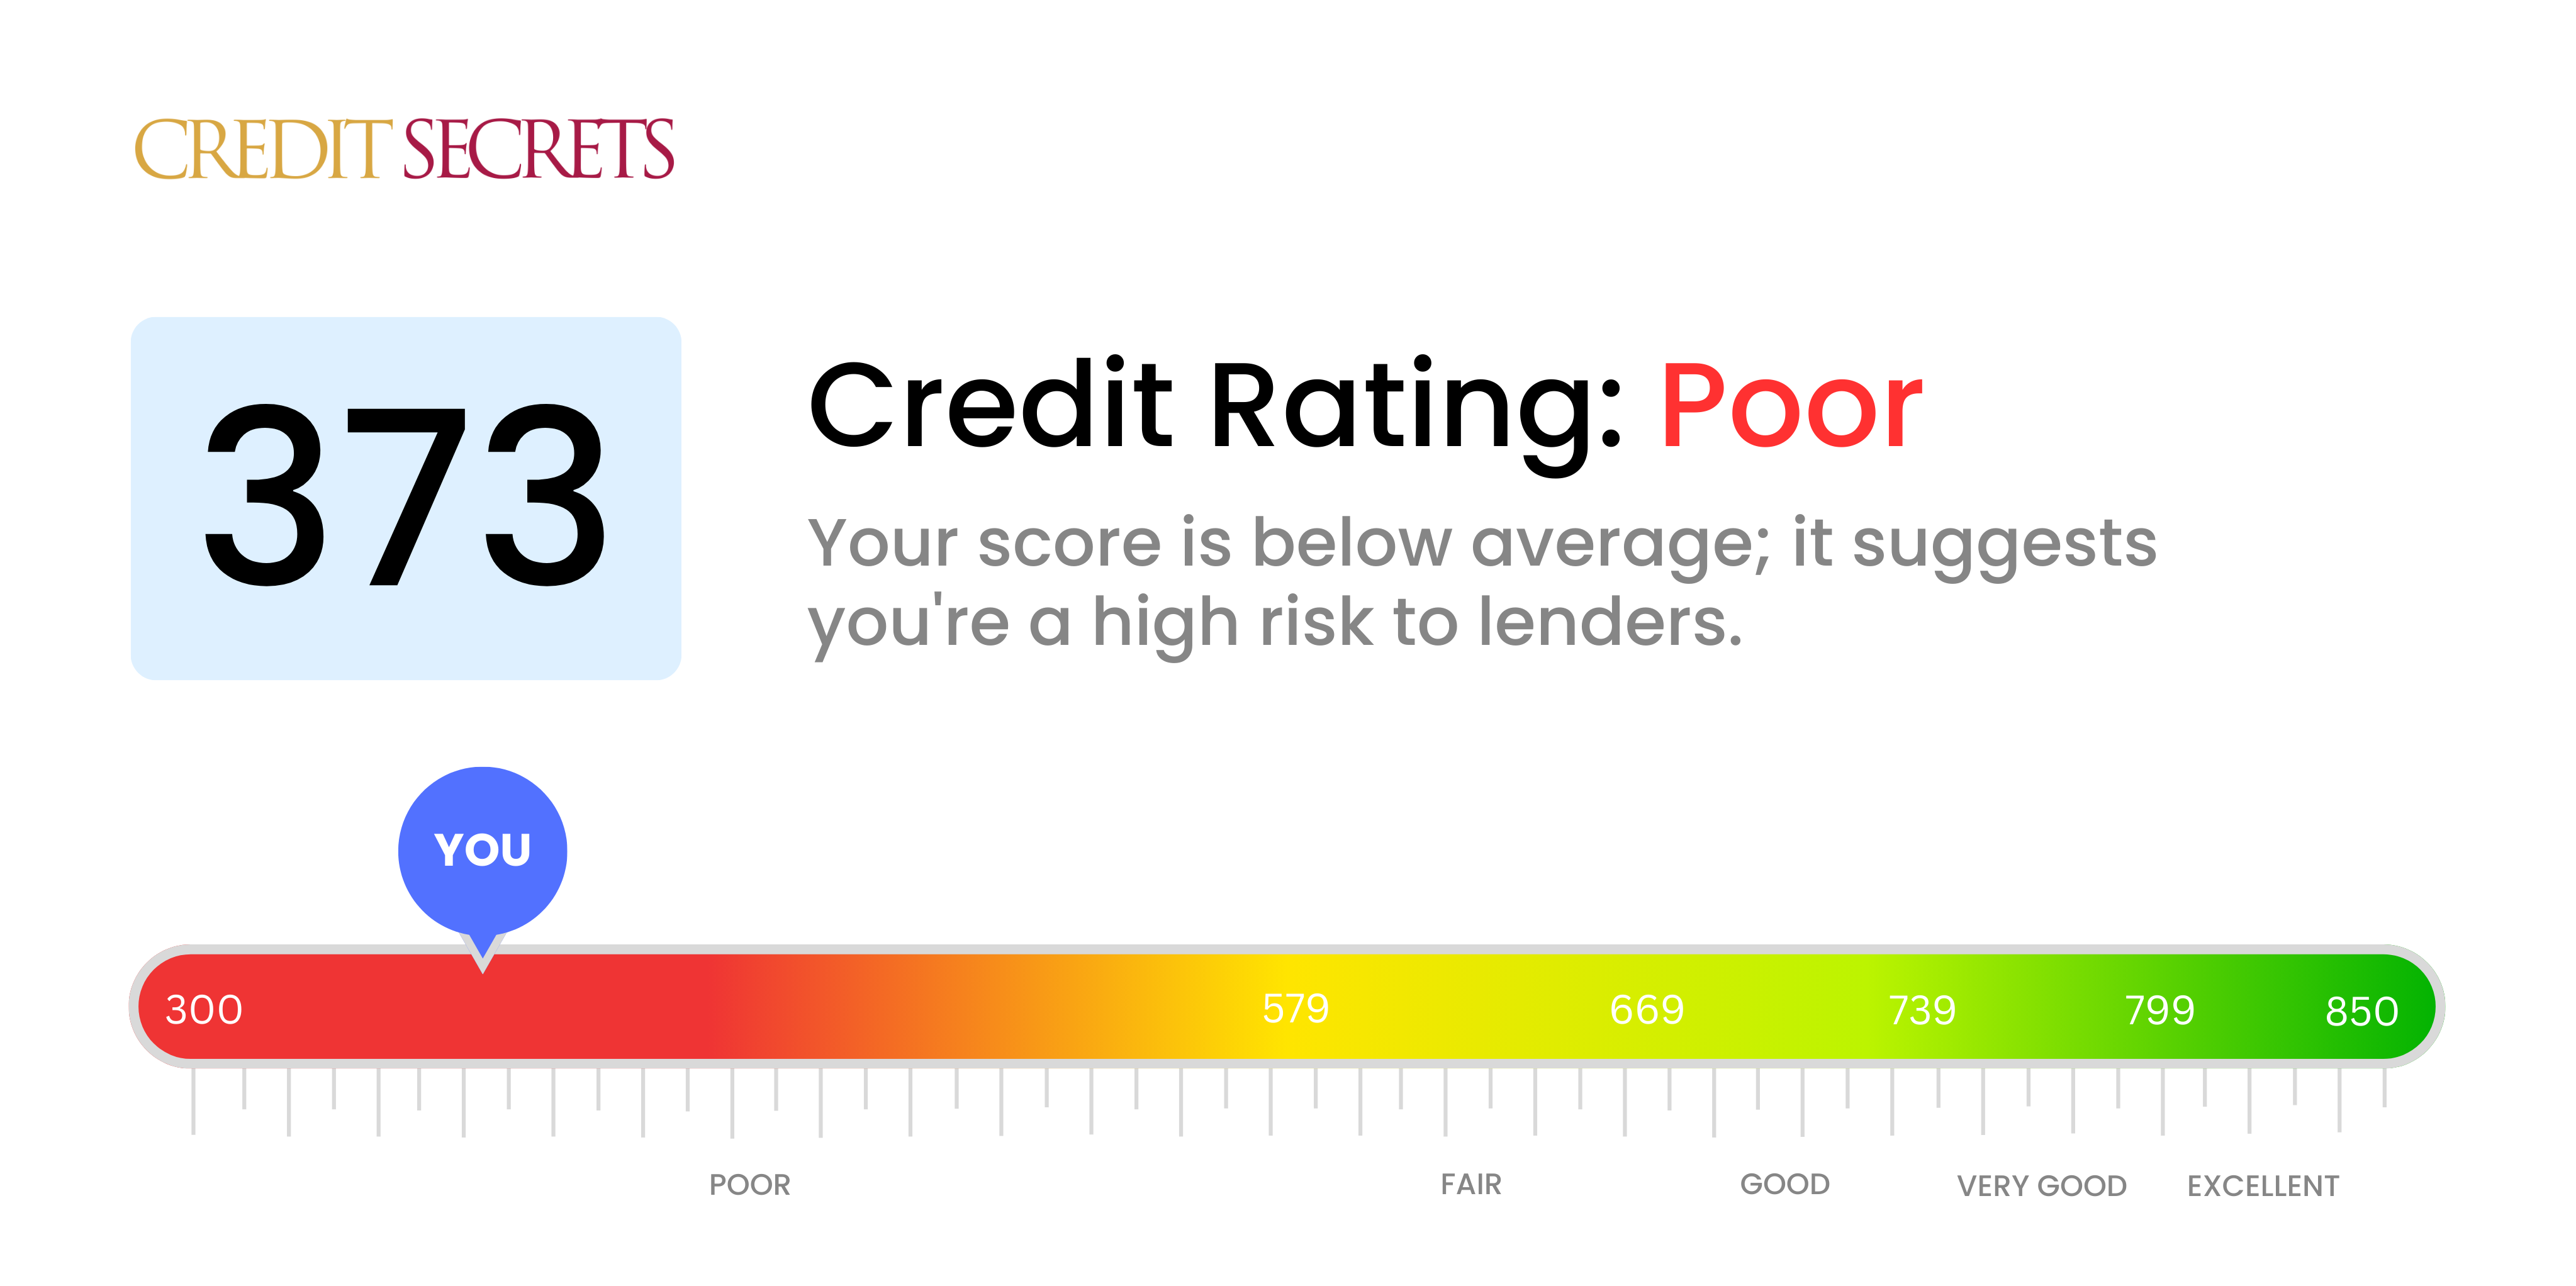 Is 373 a good credit score?